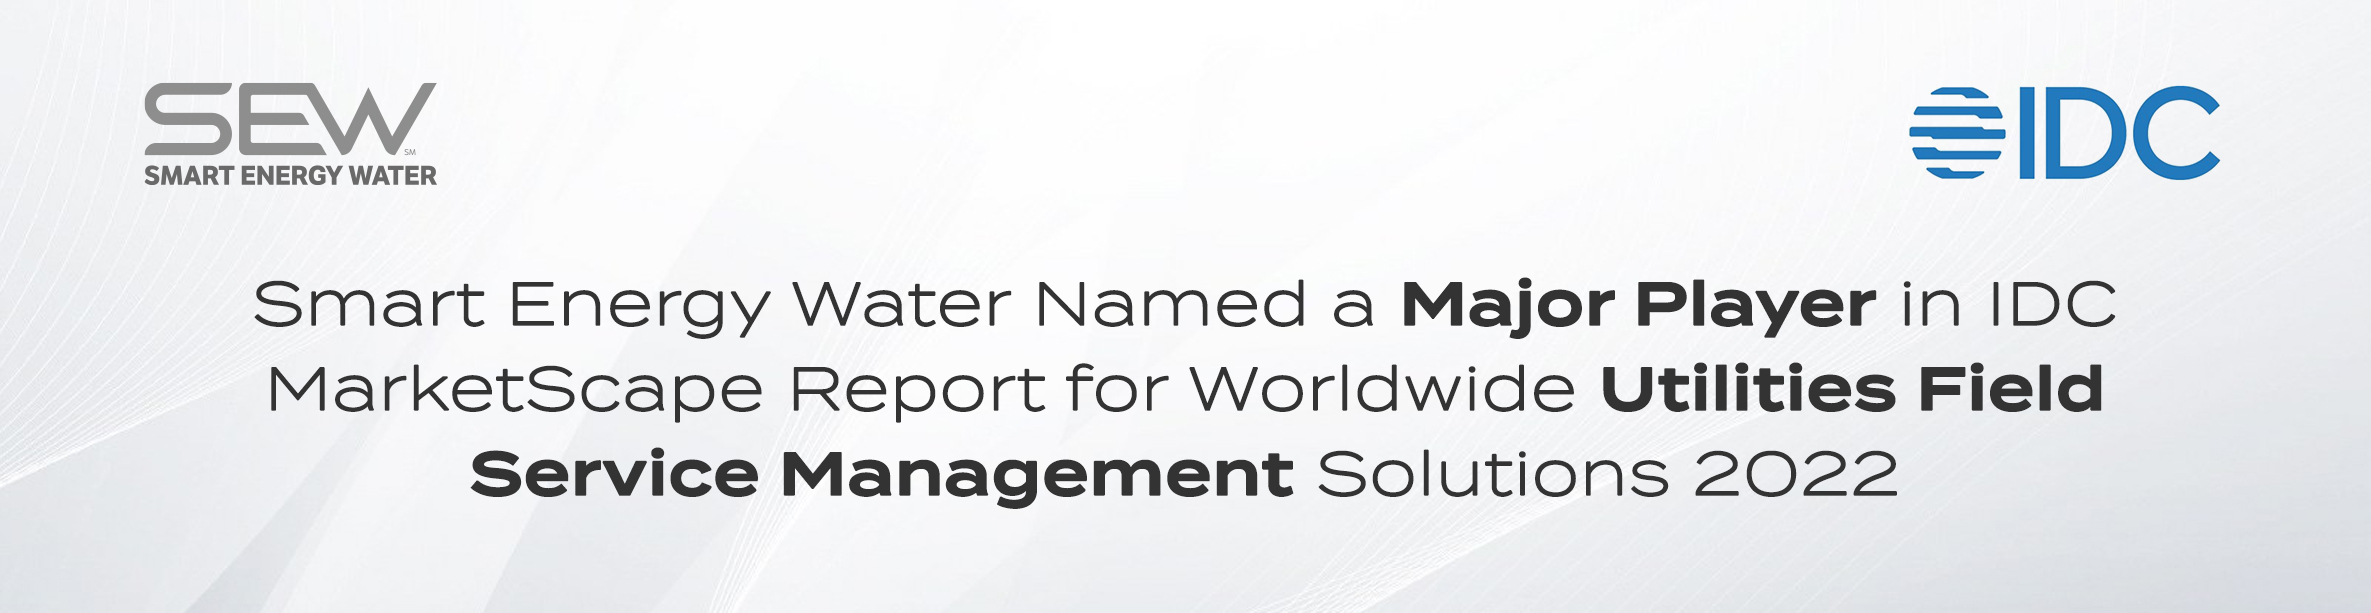 Smart Energy Water Named a Major Player in IDC MarketScape Report for Worldwide Utilities Field Service Management Solutions 2022